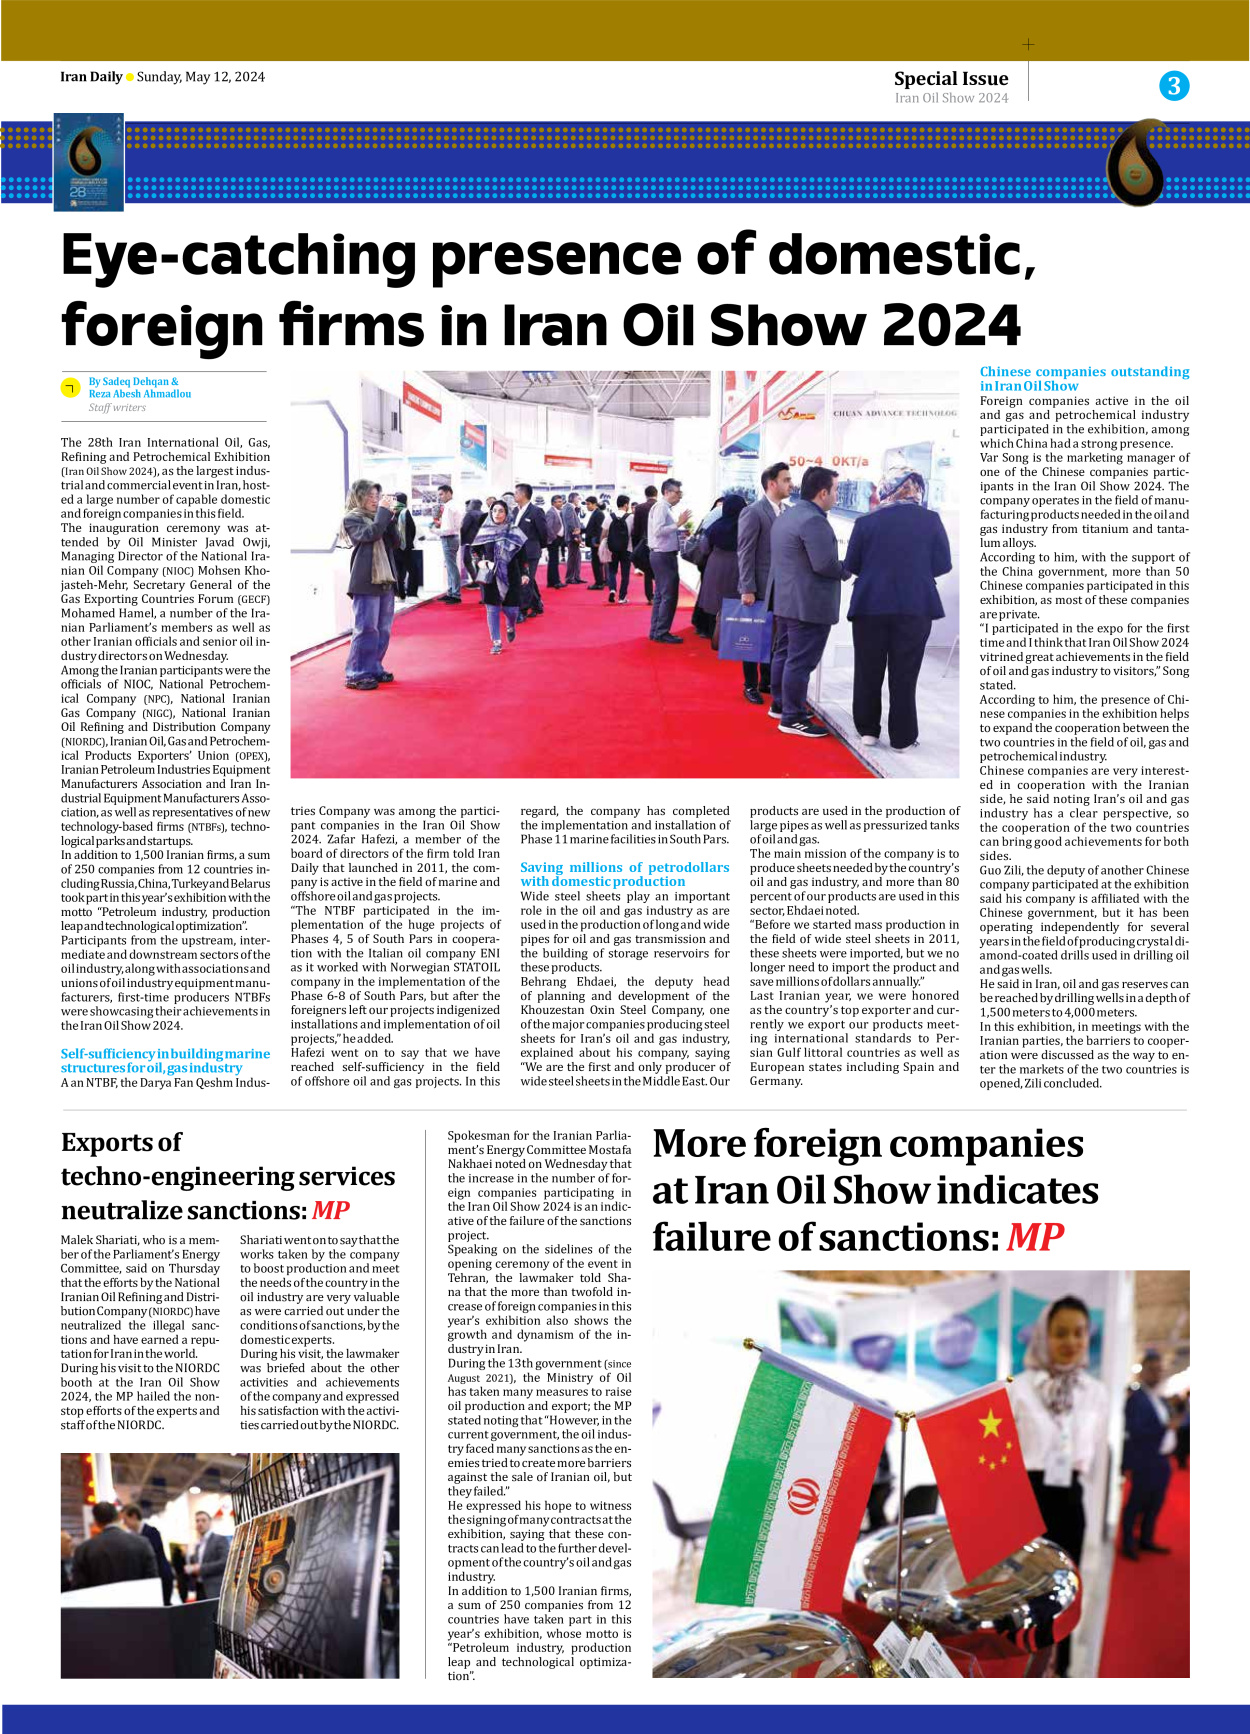 Iran Daily - Number Seven Thousand Five Hundred and Fifty Five - 12 May 2024 - Page 3